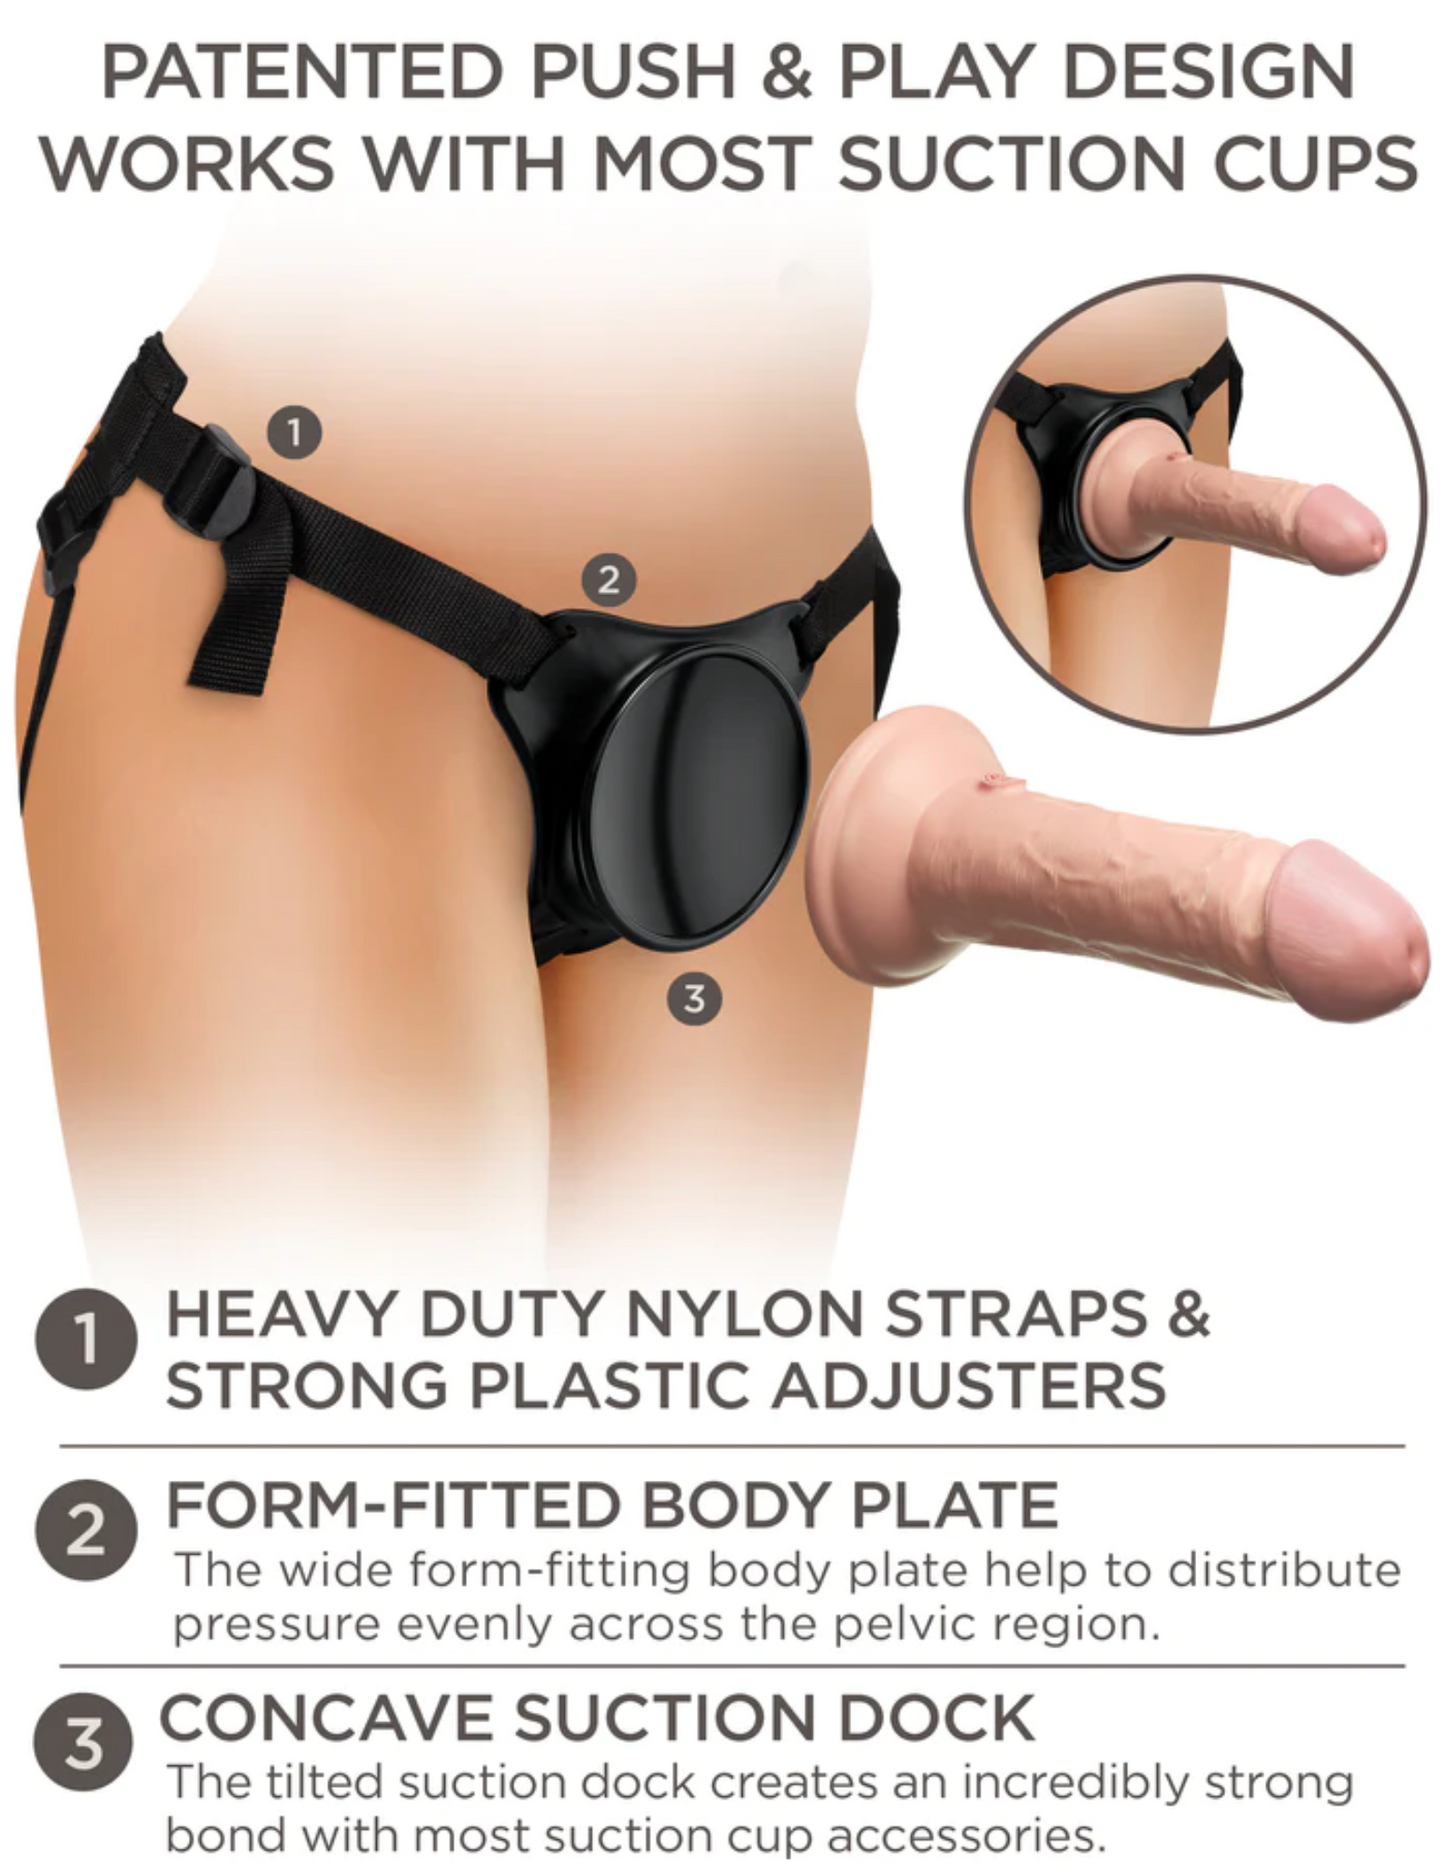 Diagram shows of the special features of the King Cock Elite Comfy Body Dock Harness System from Pipedreams.